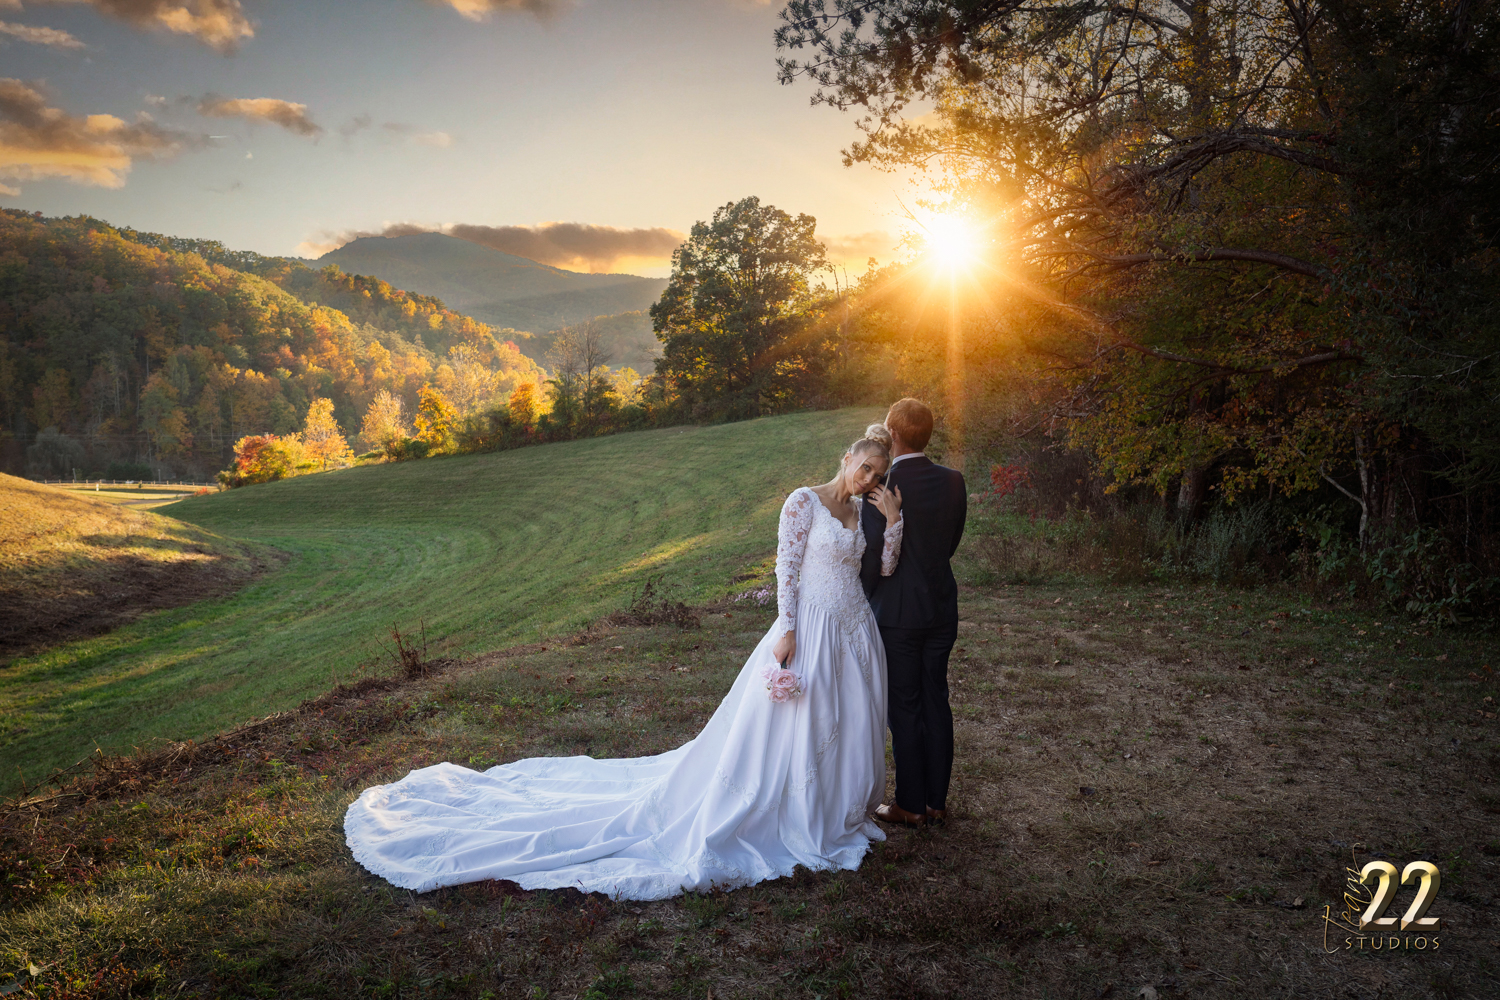 Bride leaning on her groom's shoulder as the sun sets in a meadow